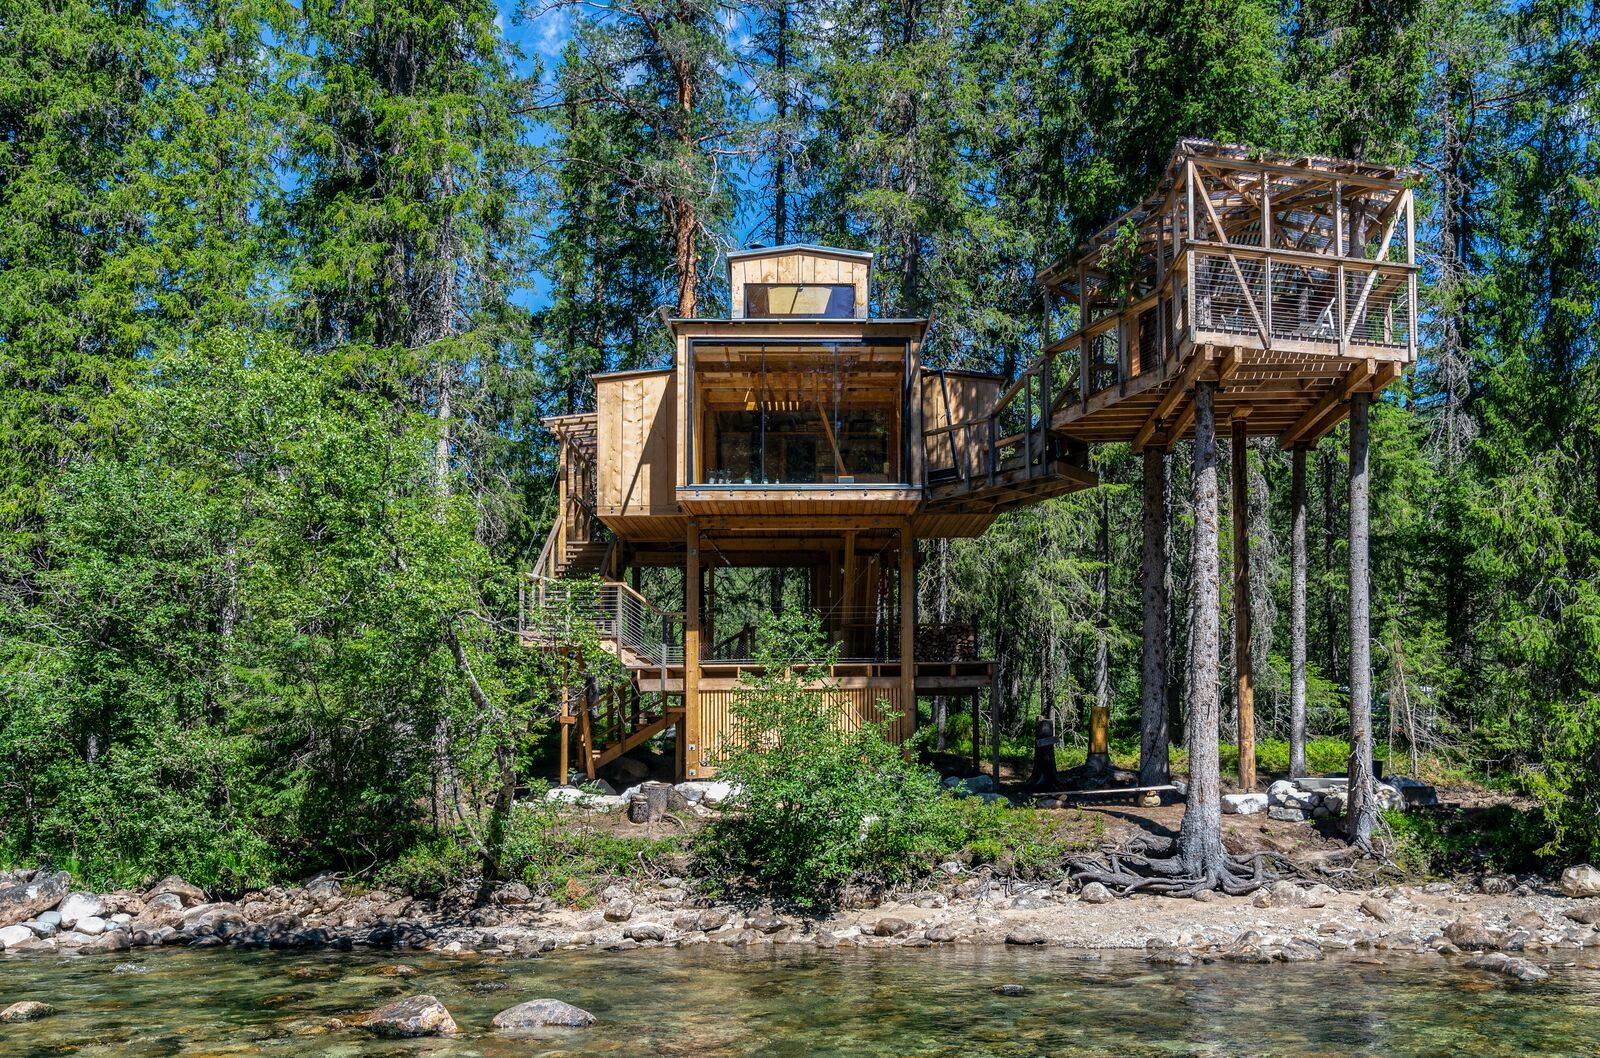 A Auge River Eye Treehouse Treehouses For Rent In Tinn Telemark Norway